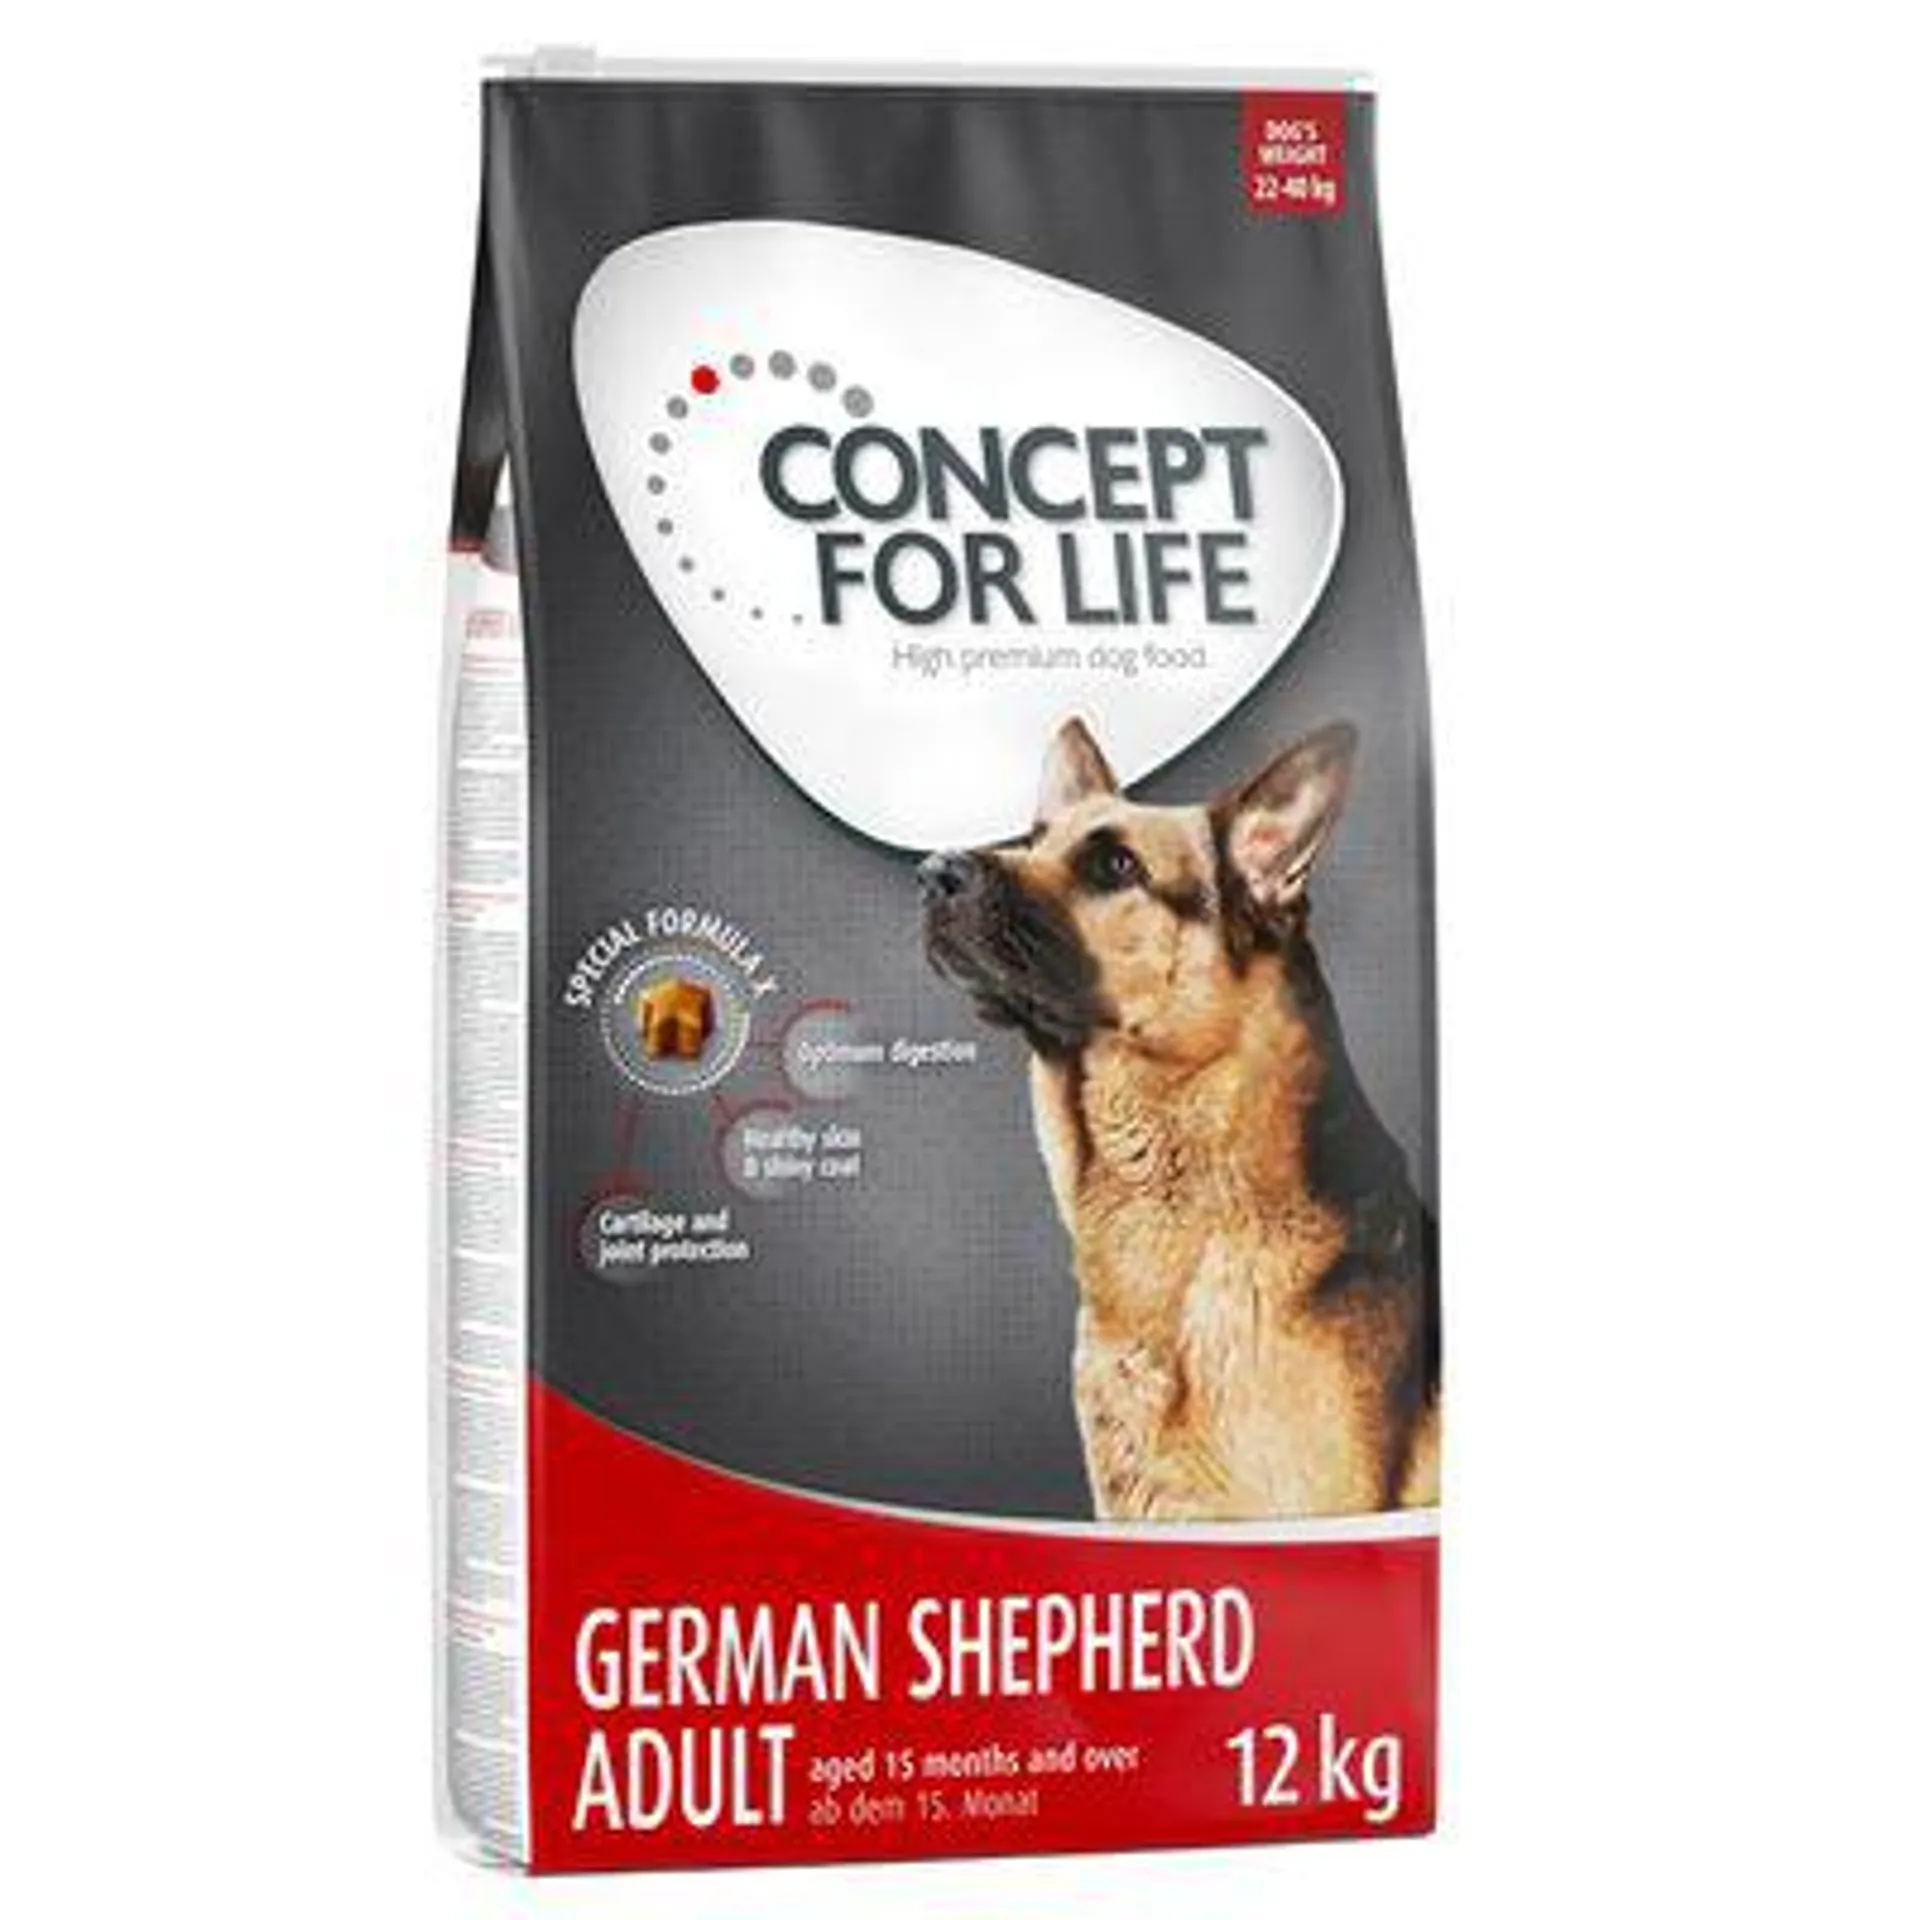 2 x 4kg/12kg Concept for Life Dry Dog Food - Special Price!*